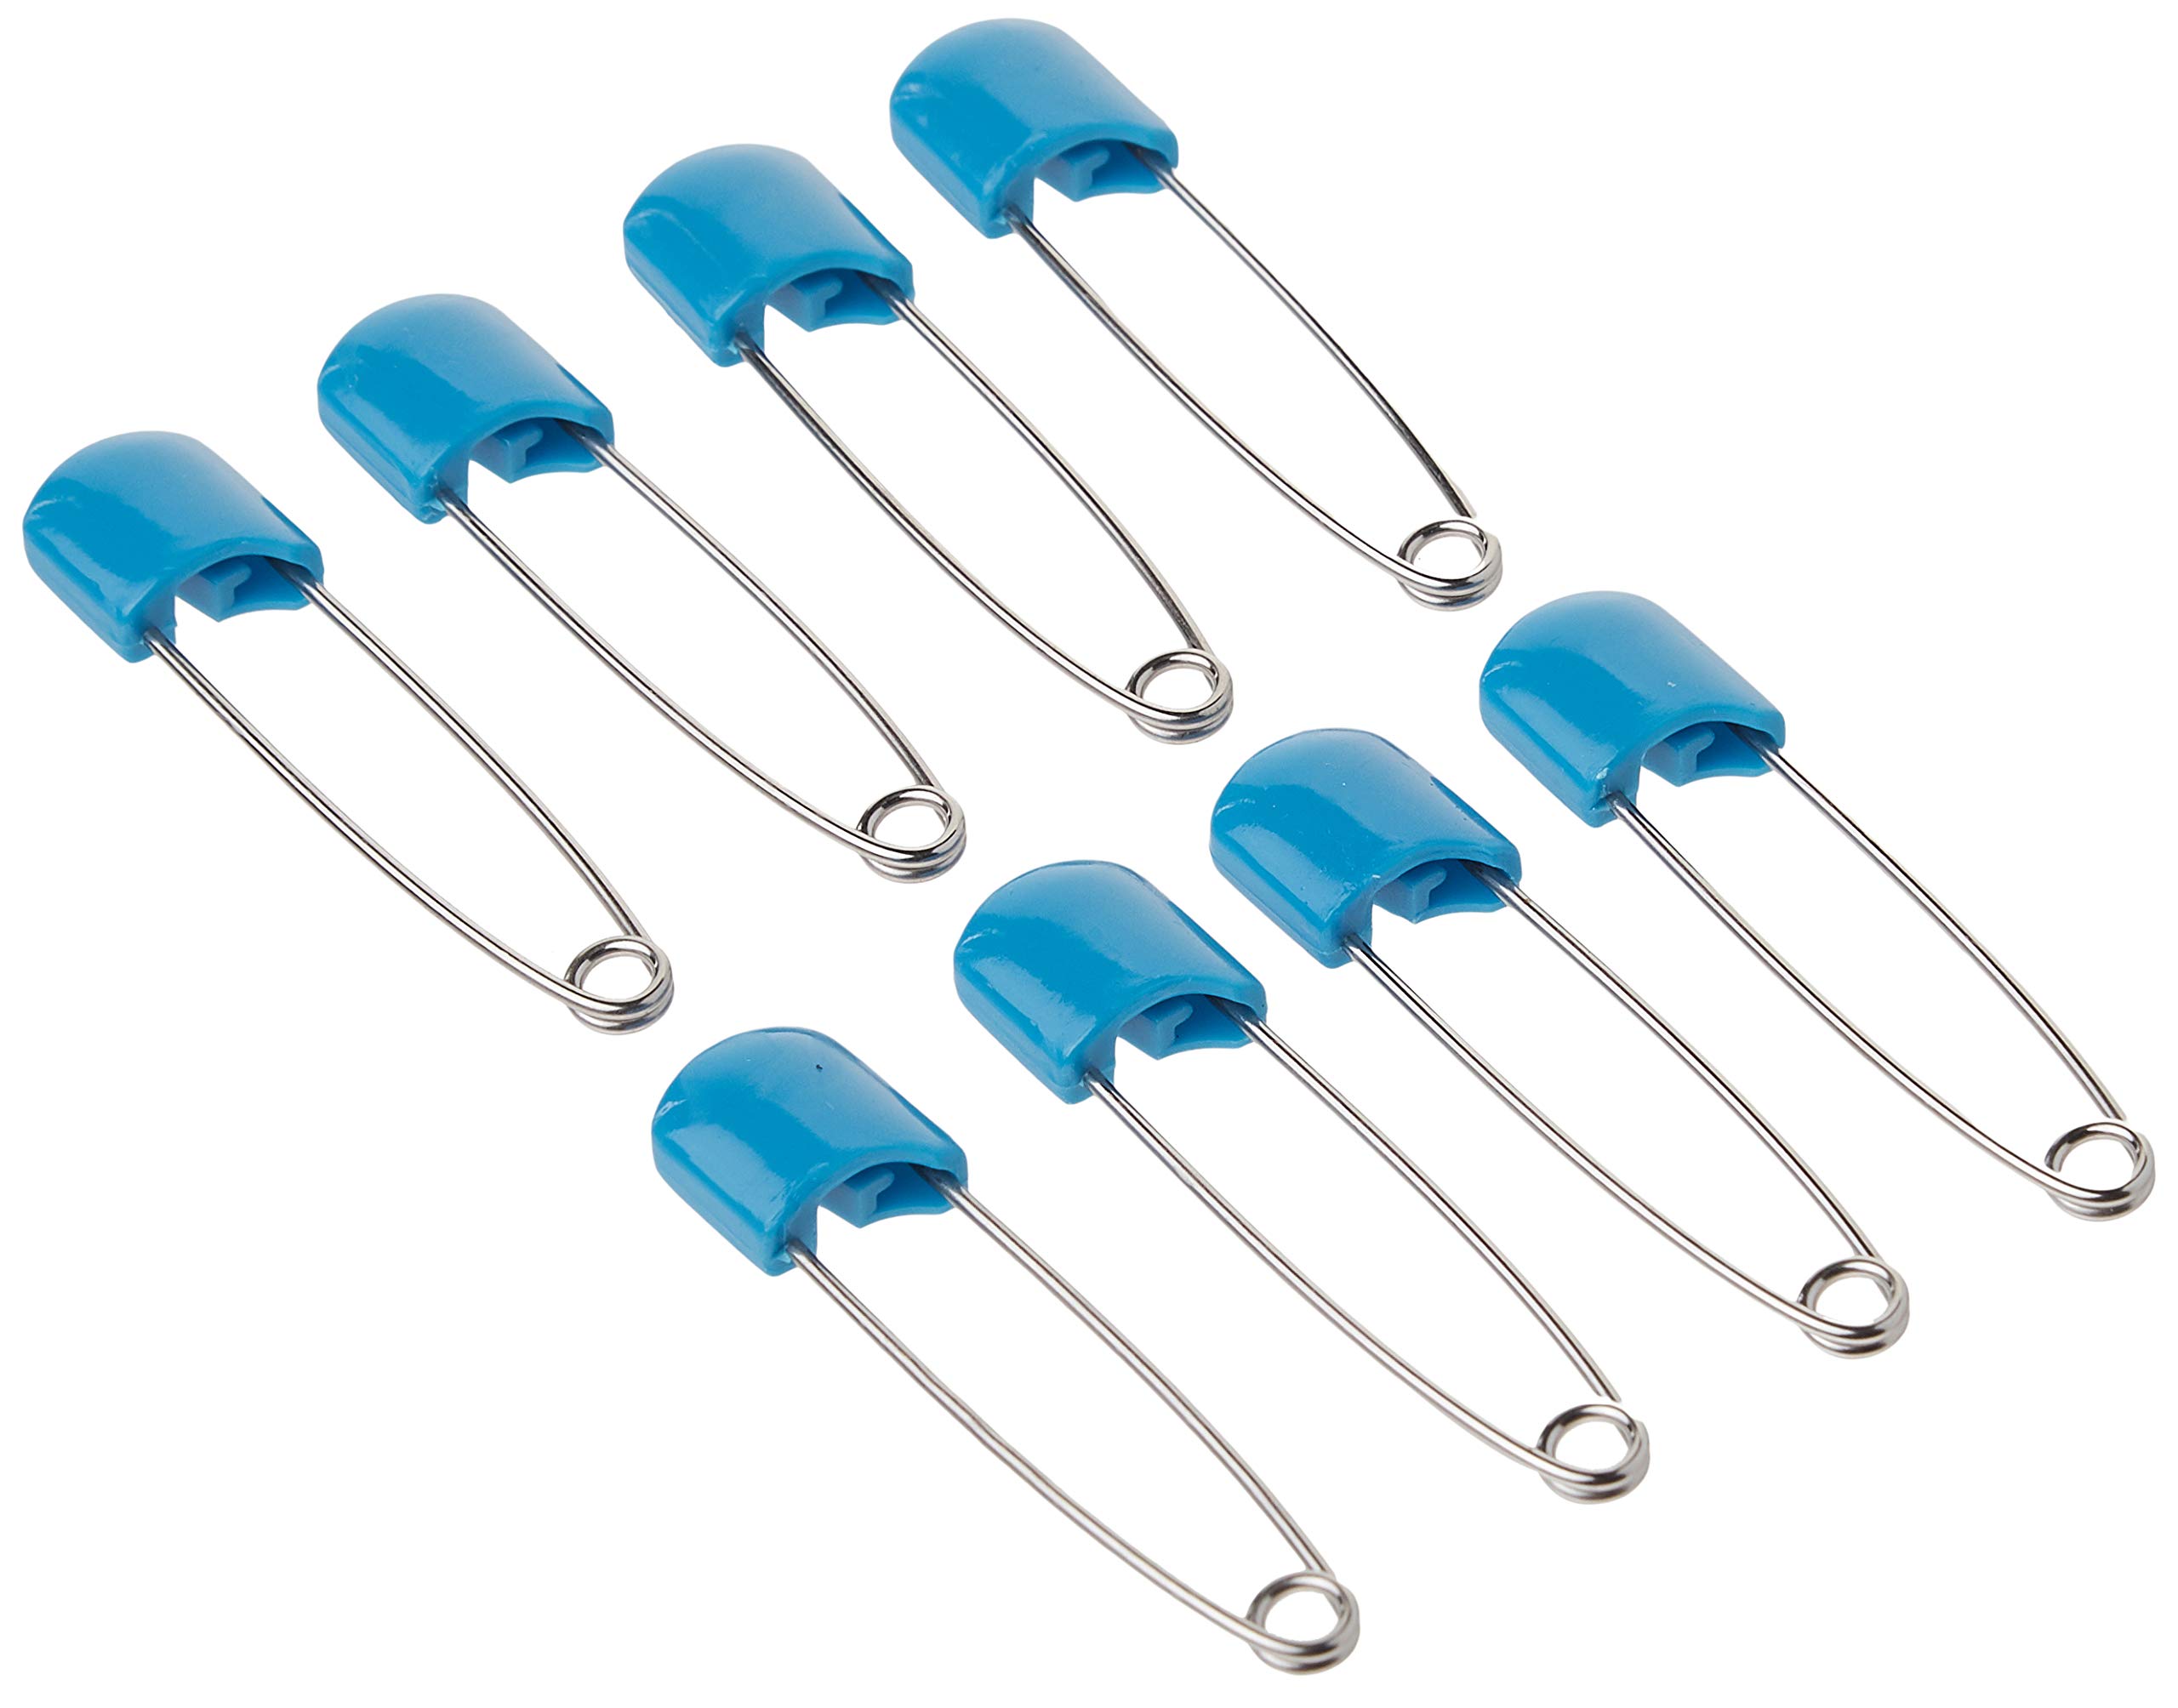 OsoCozy Diaper Pins - {Blue} - Sturdy, Stainless Steel Diaper Pins with Safe Locking Closures - Use for Special Events, Crafts or Colorful Laundry Pins (Pack of 3)